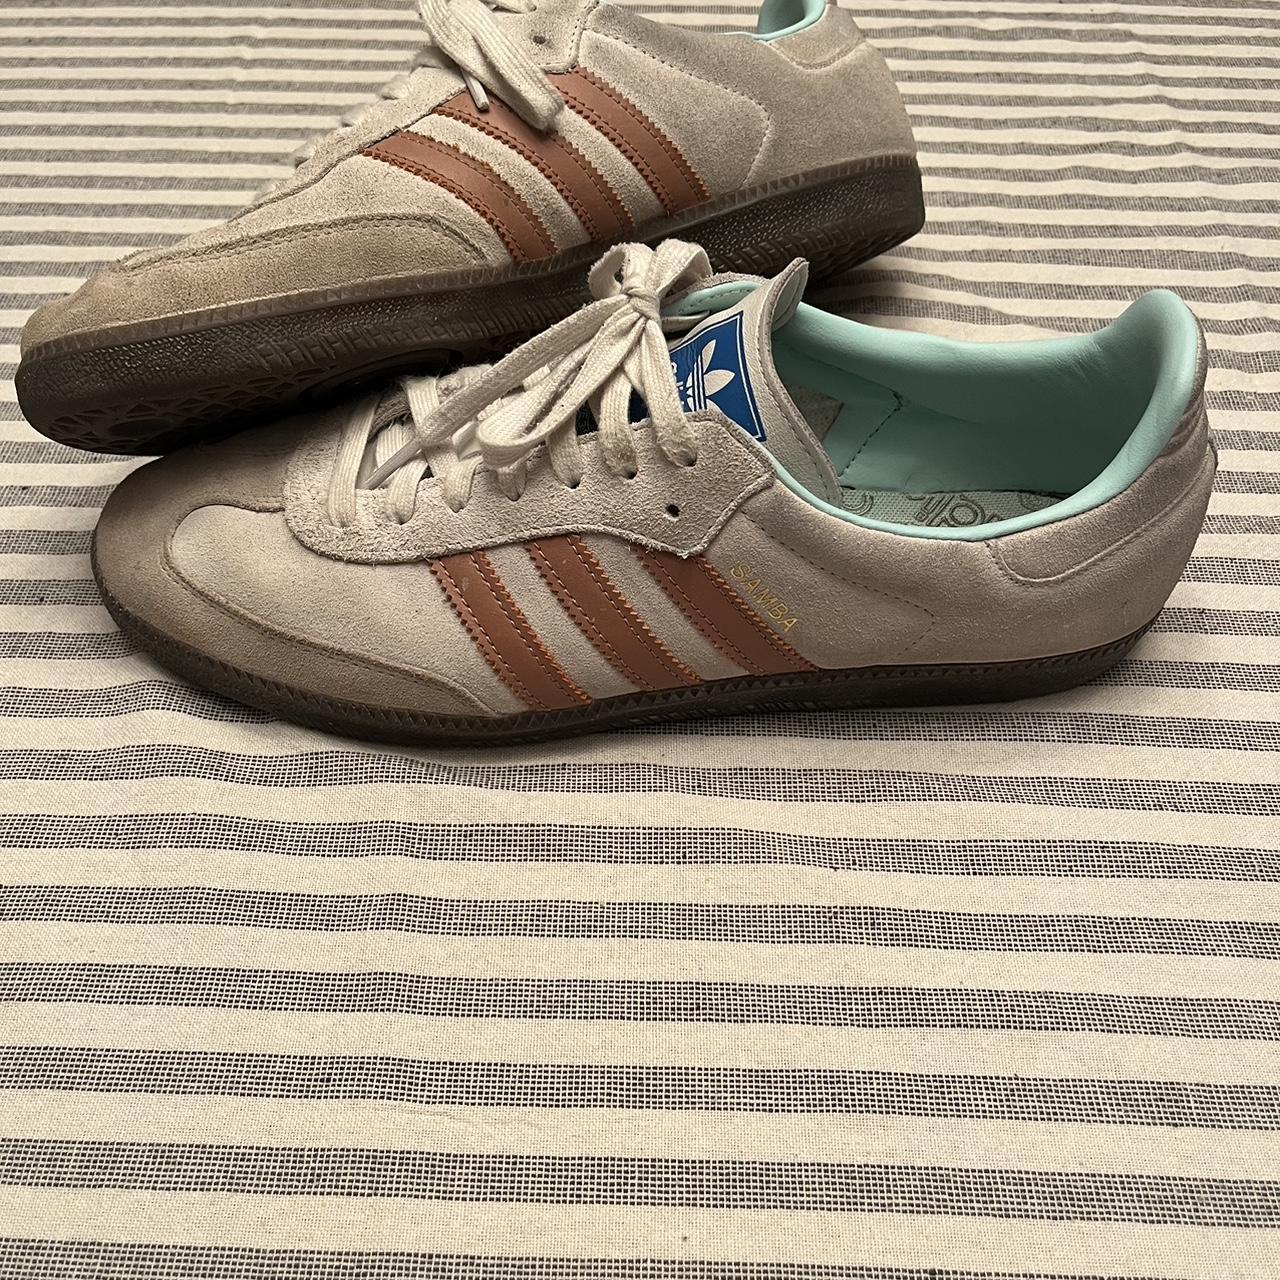 Adidas Men's Cream and Blue Trainers